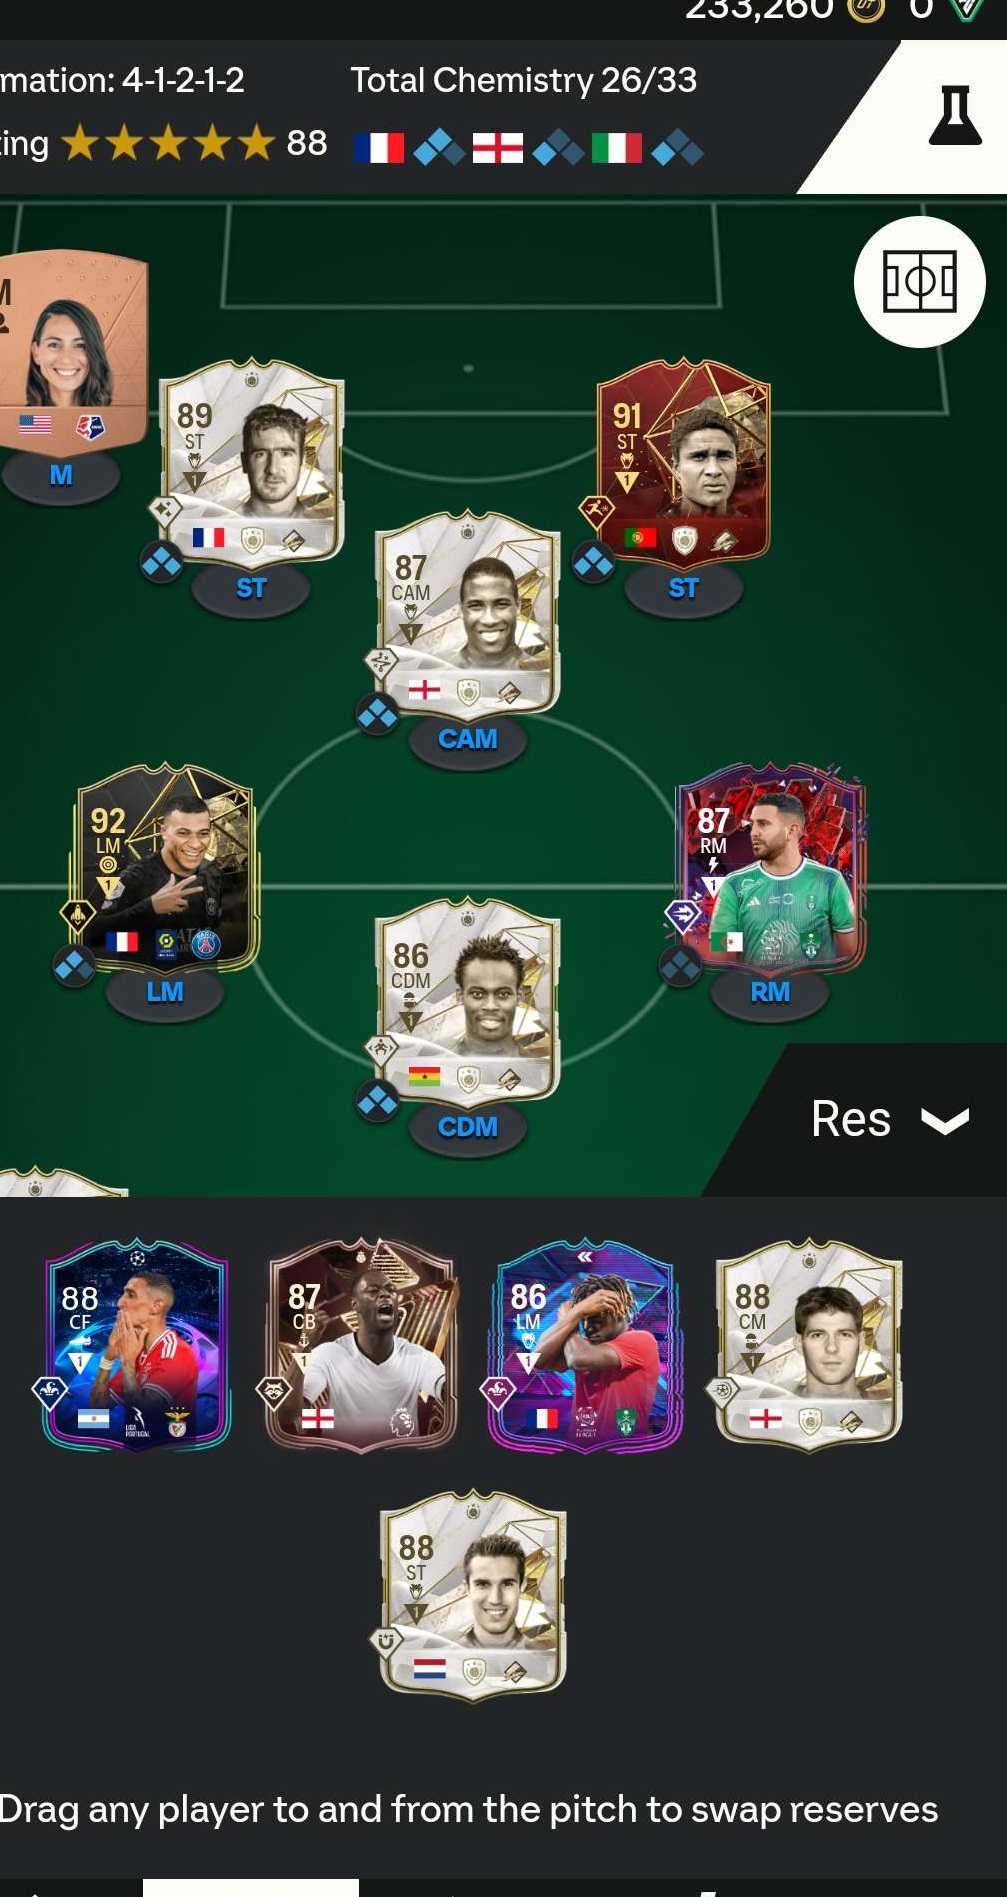 FC24 account with Best Players - eusebio mbappe and alot of icons- Best team Ez futchamps win - worth more than 10millon coin